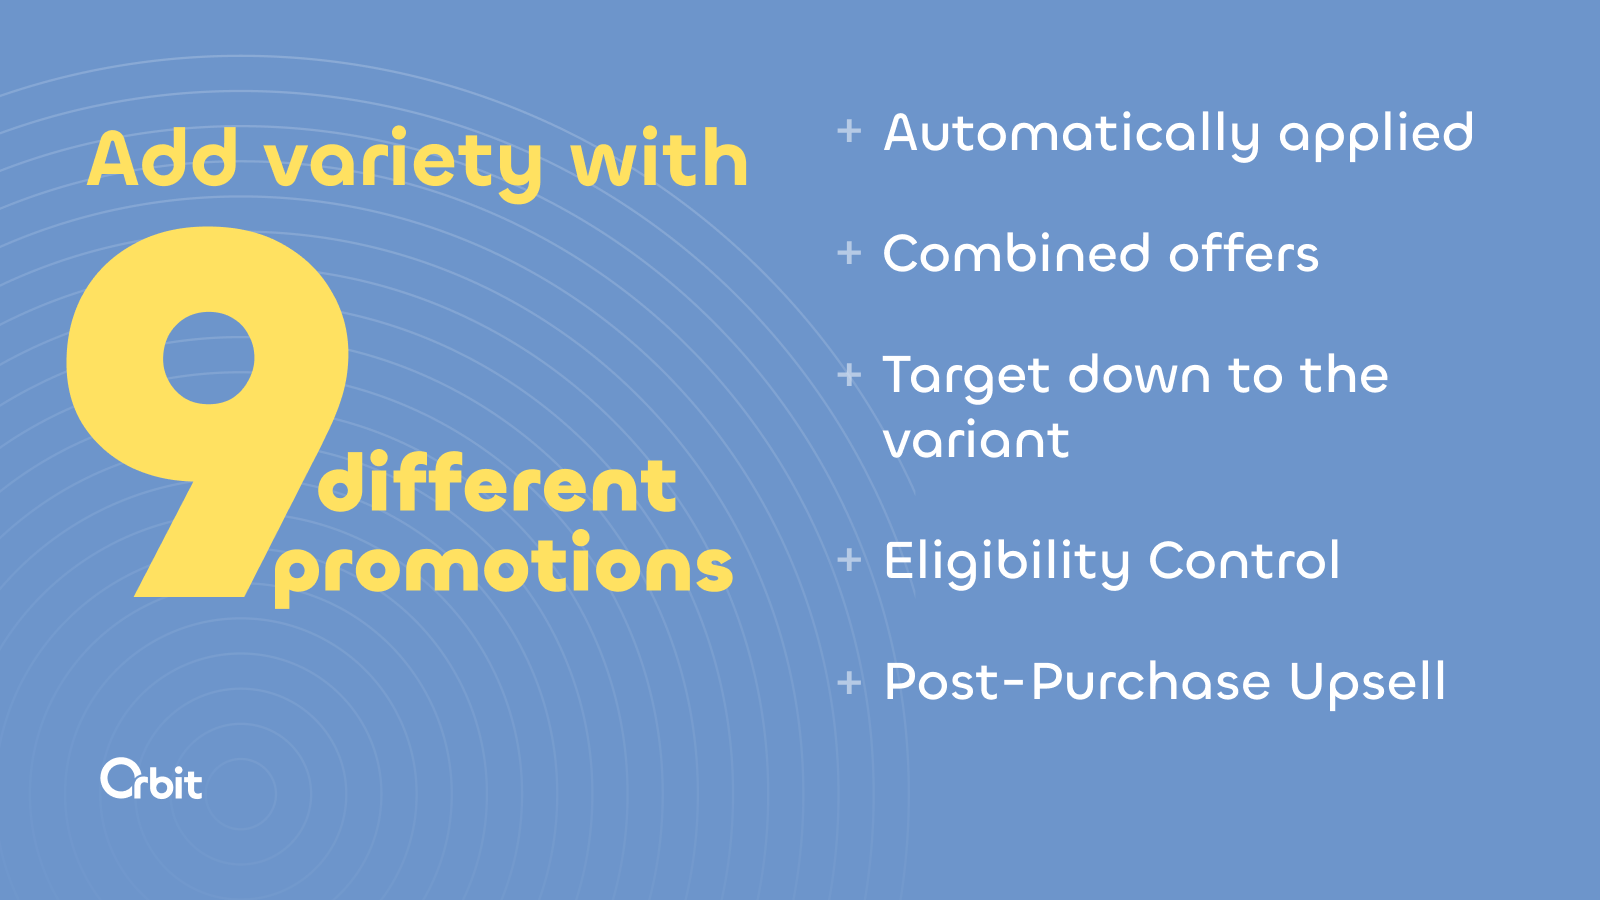 Add variety with 9 different promotions that automatically apply